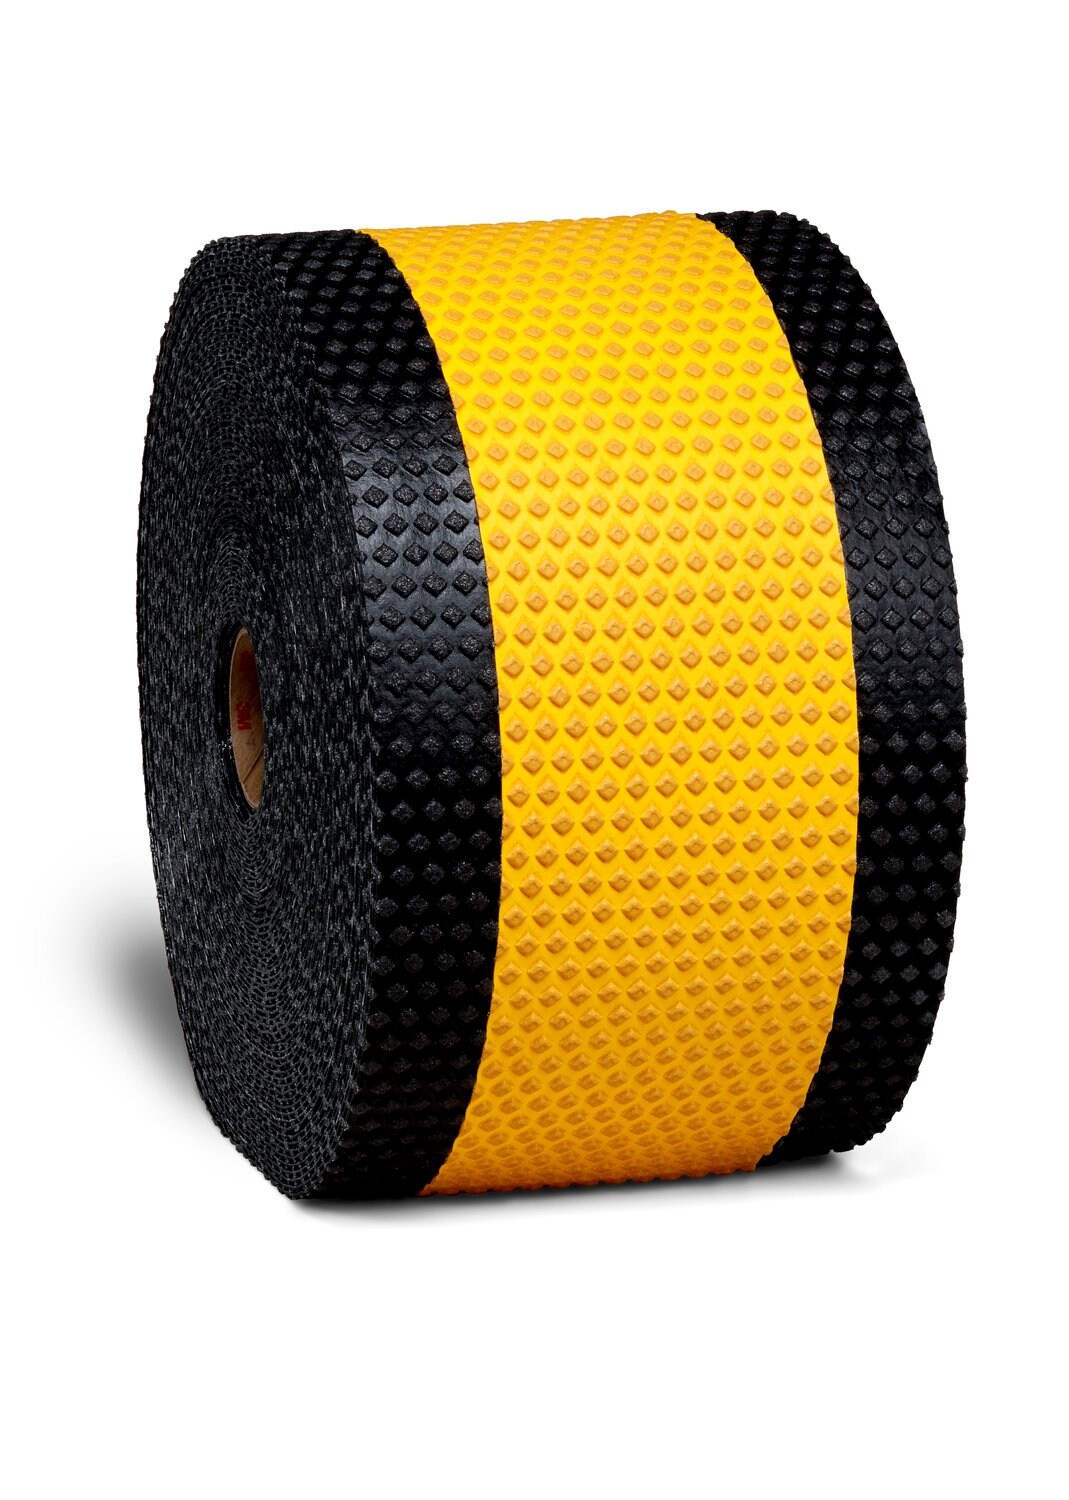 7010344018 - 3M Stamark High Performance Contrast Tape A381AW-5
Yellow/Black, Net, 9 in x 50 yd, 6 in with 1.5 in borders